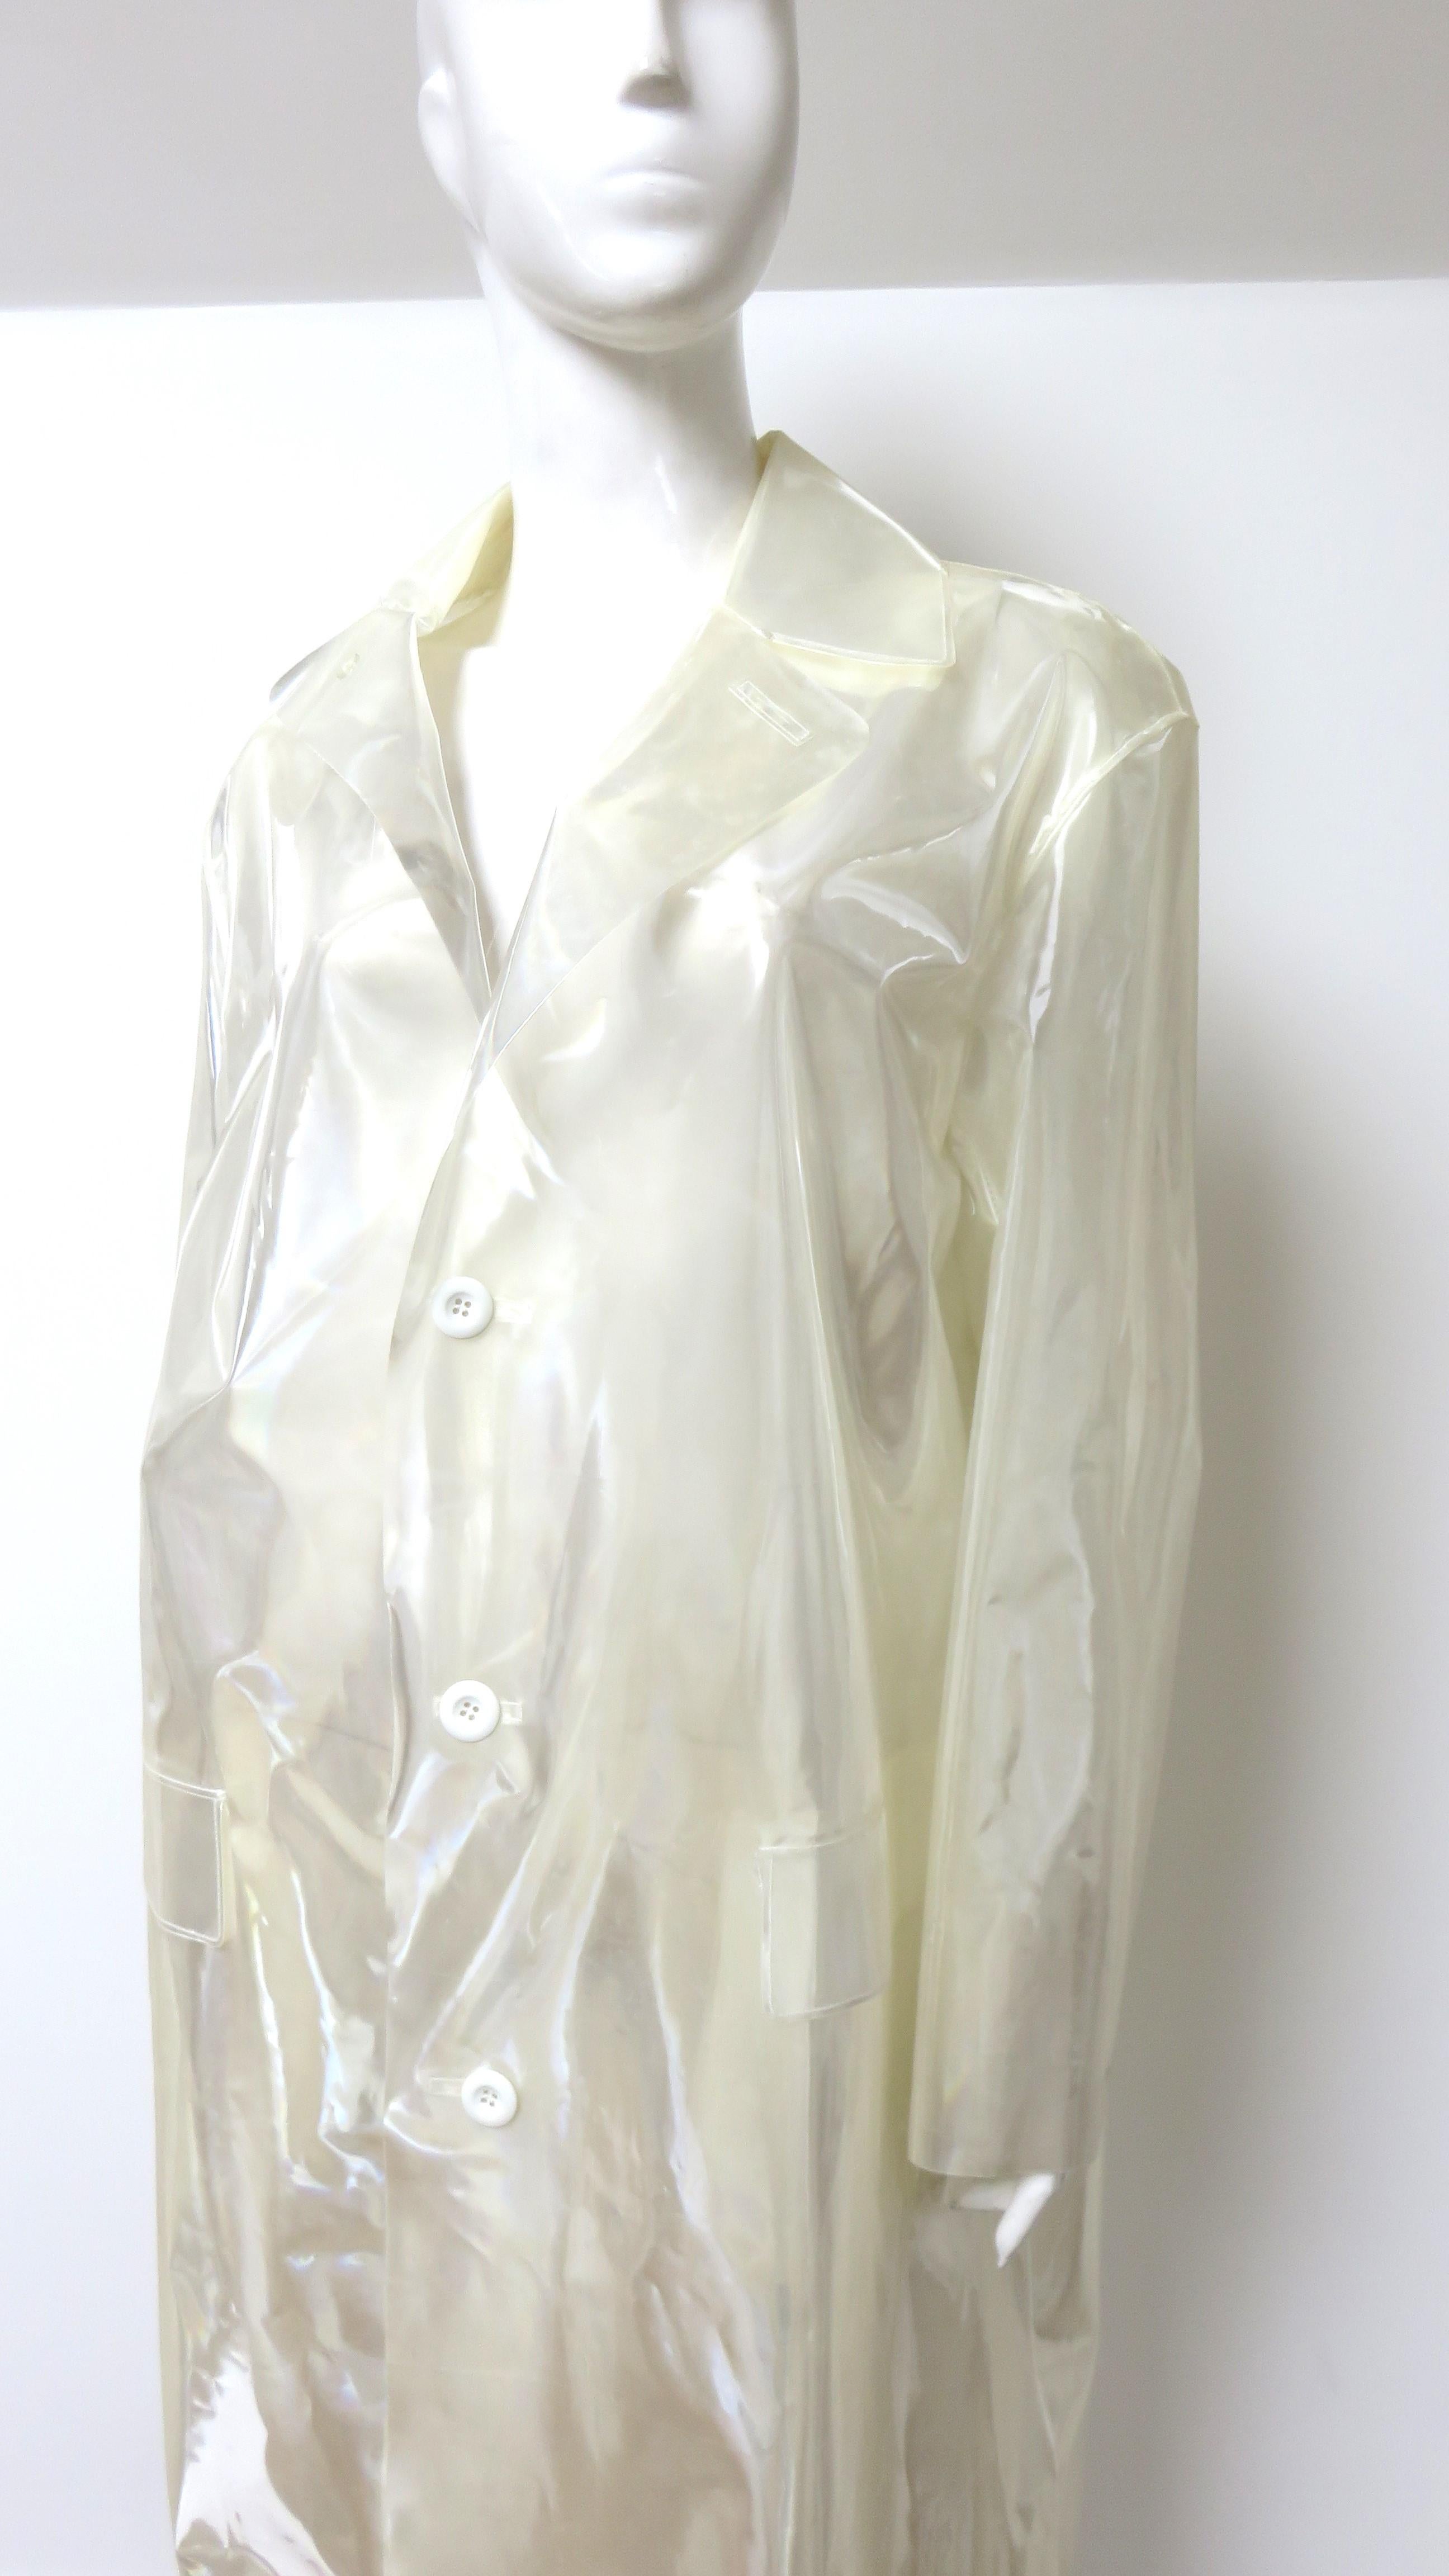 Maison Margiela New Translucent Raincoat S/S 2018 In New Condition For Sale In Water Mill, NY